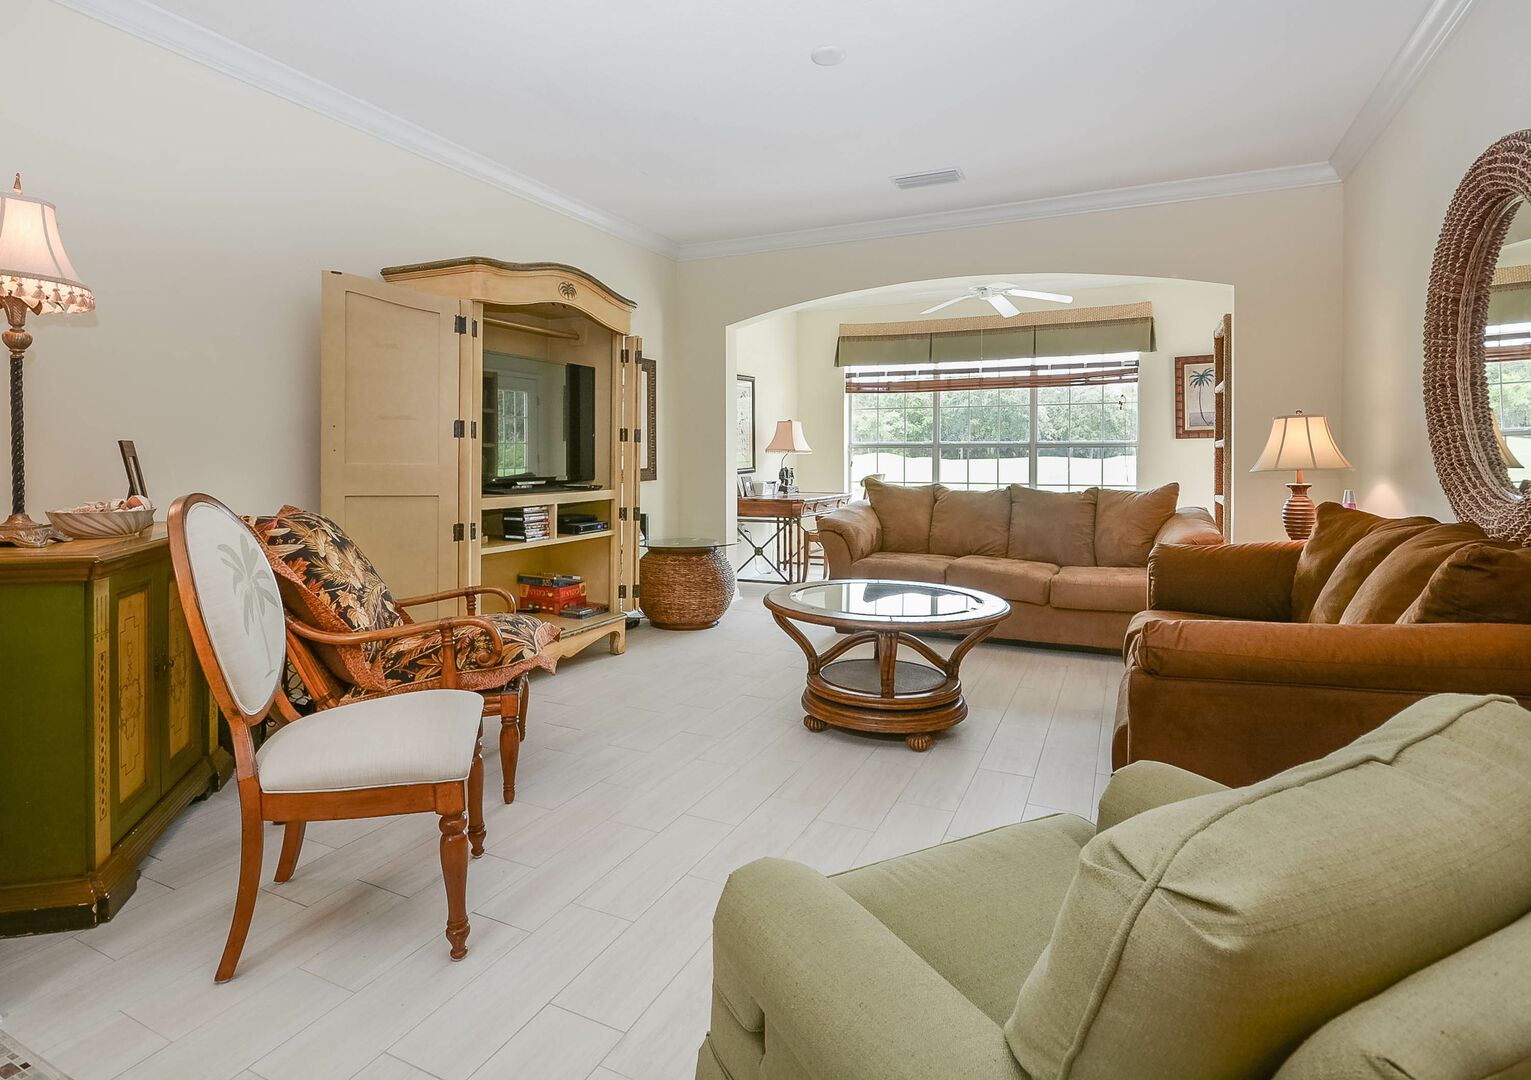 The spacious living area of this new Smyrna beach Florida vacation home with ample seating and large TV.